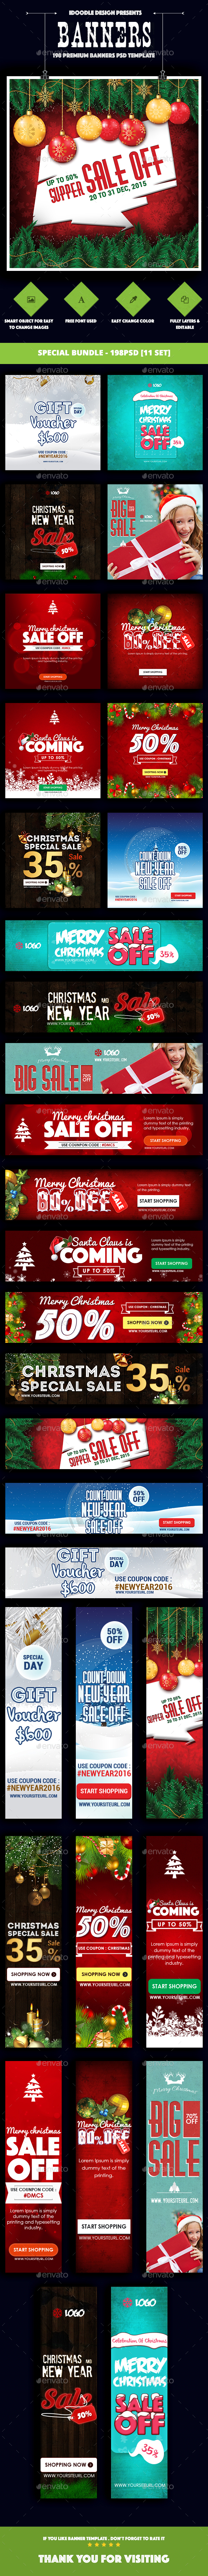 [Special Bundle] Christmas Banners Ads - 198PSD [11 Set]